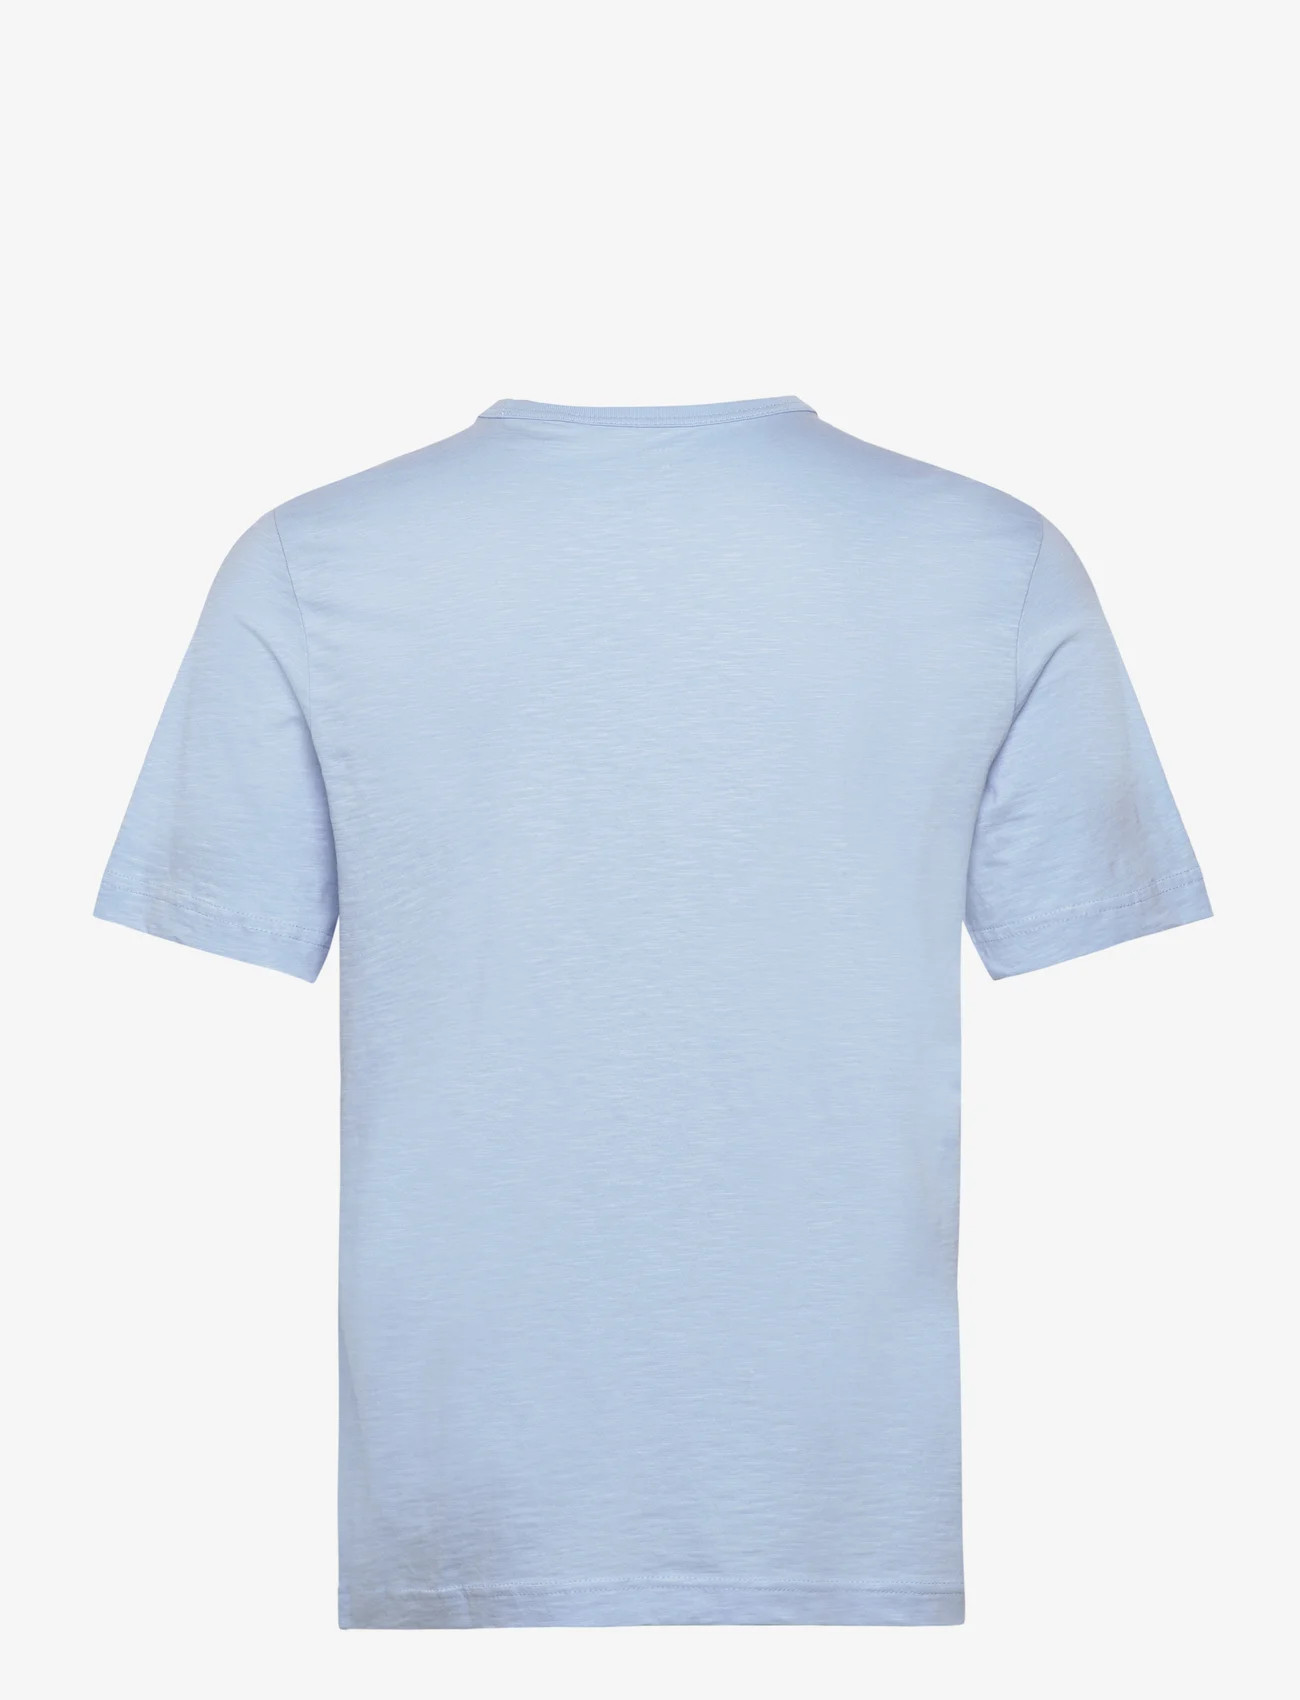 Tom Tailor - printed t-shirt - lägsta priserna - washed out middle blue - 1